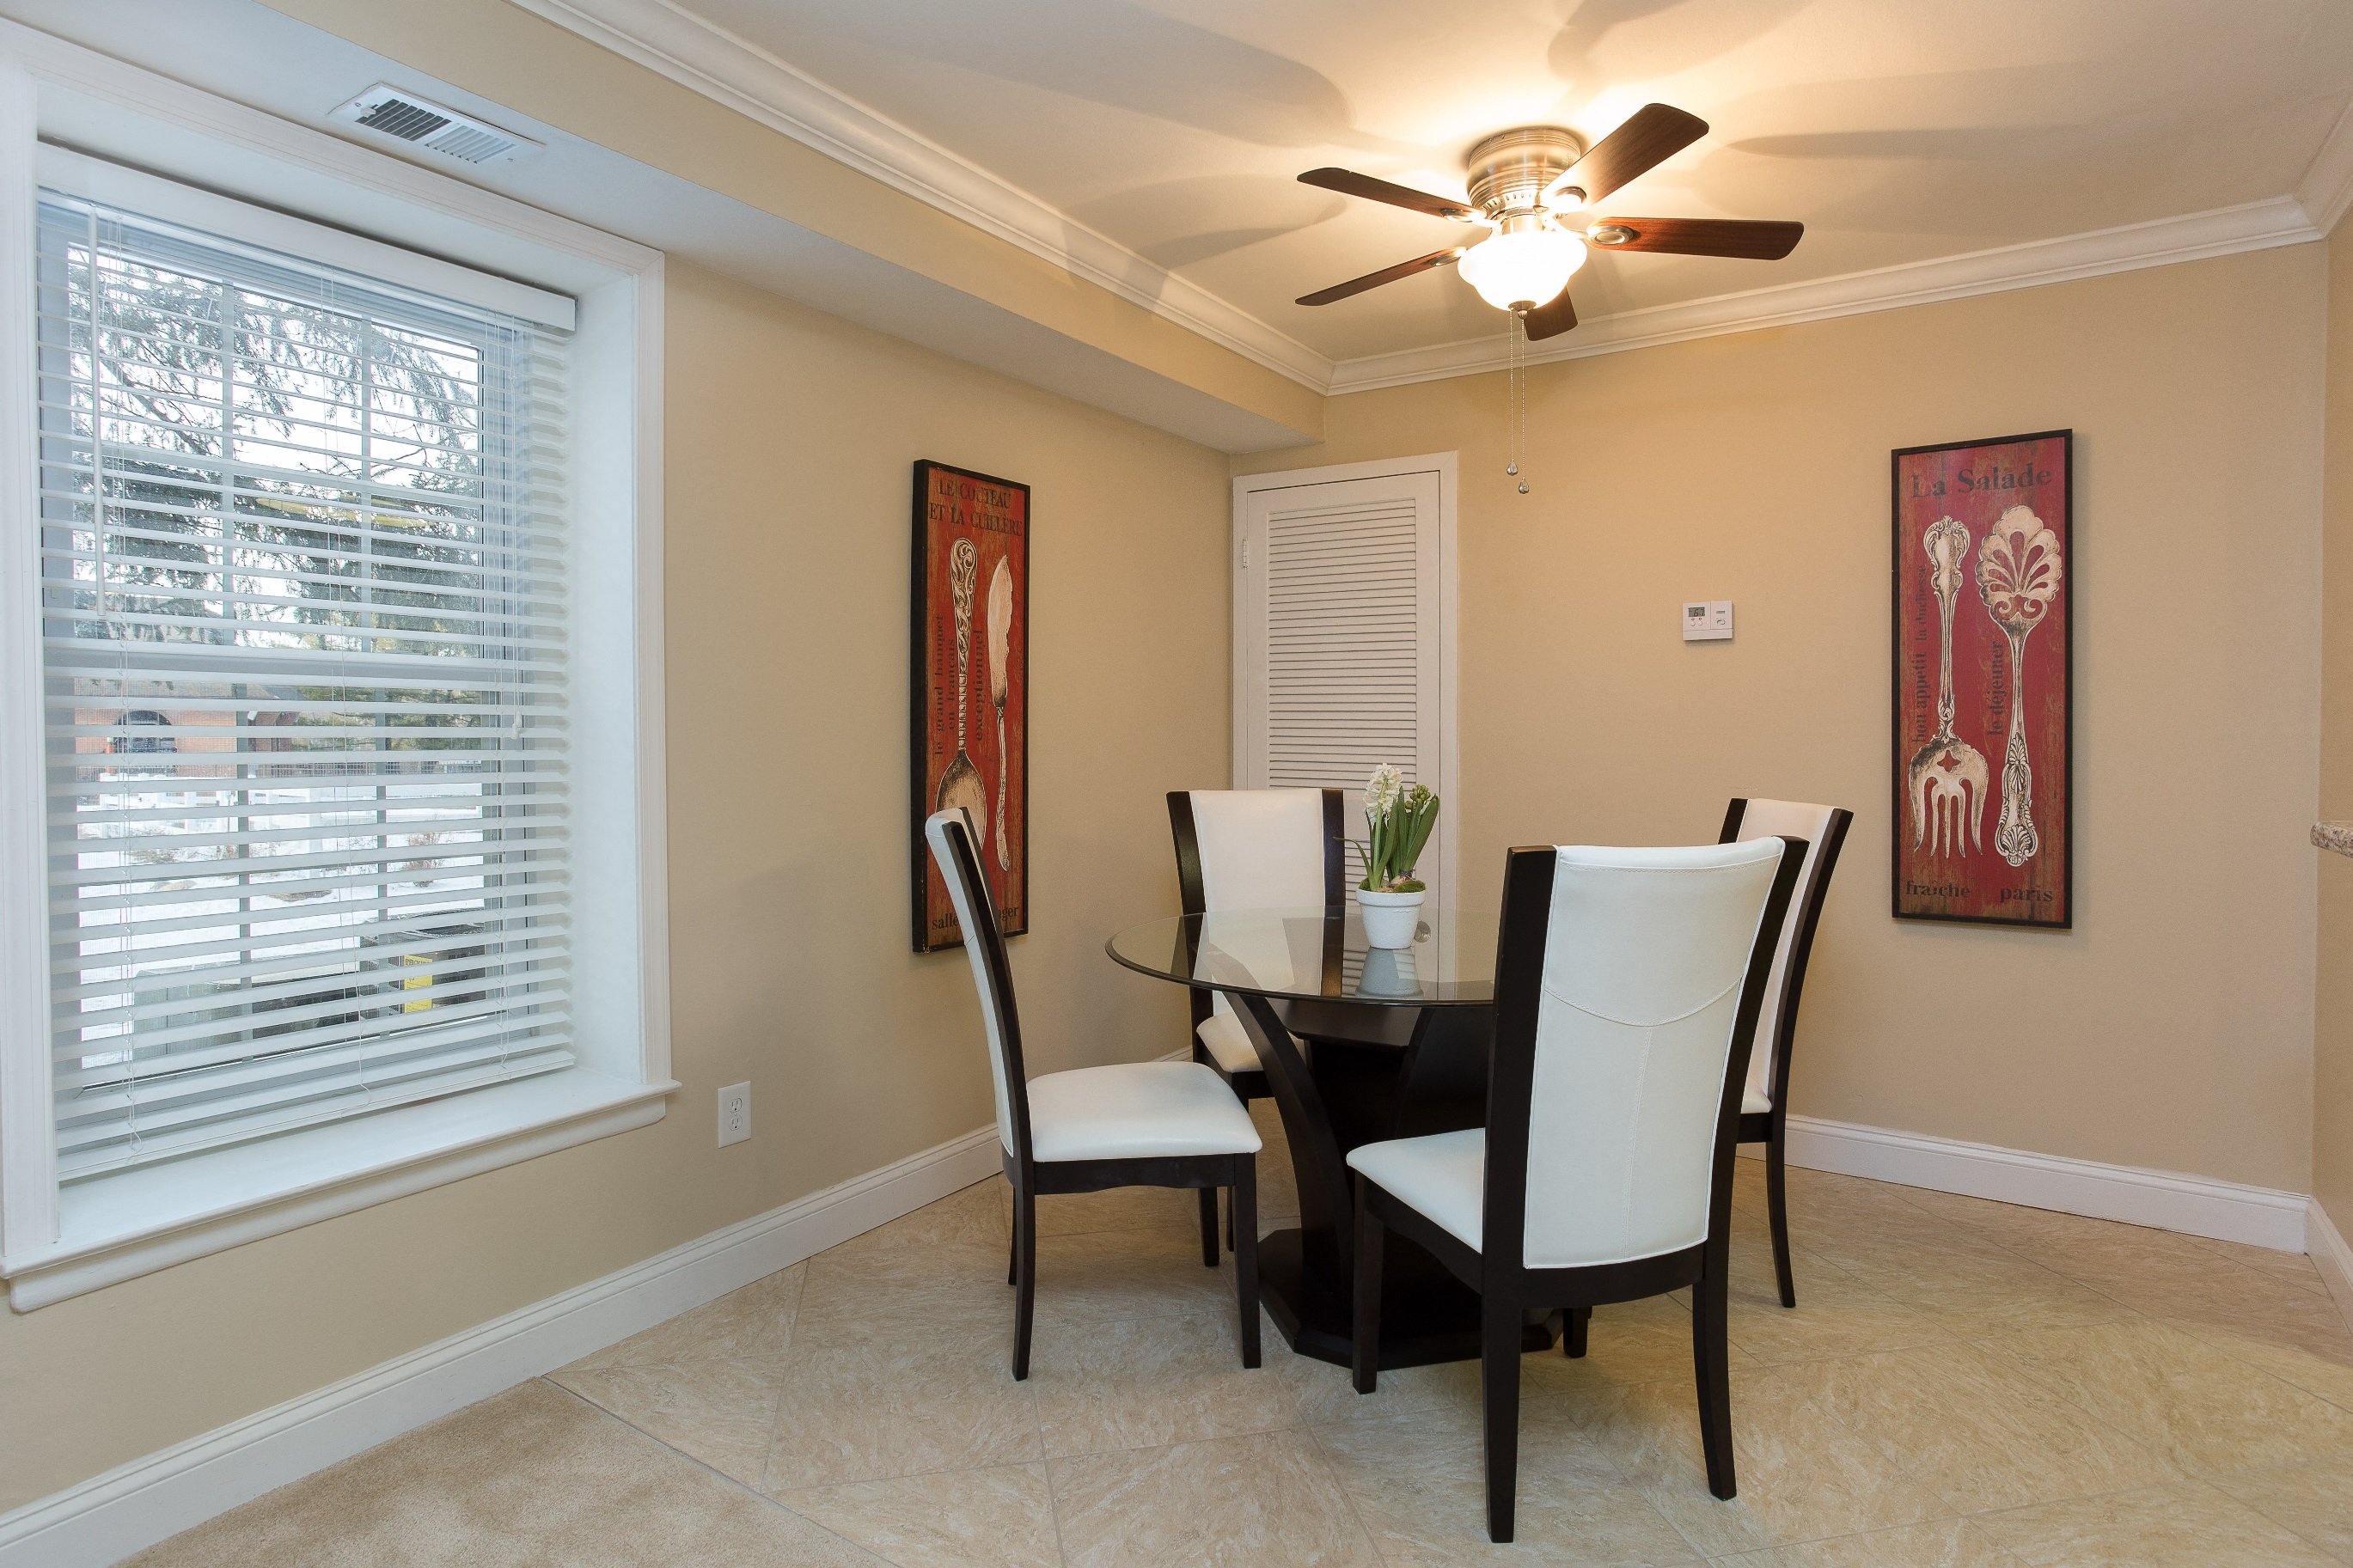 Furnished dining room with window and ceiling fan